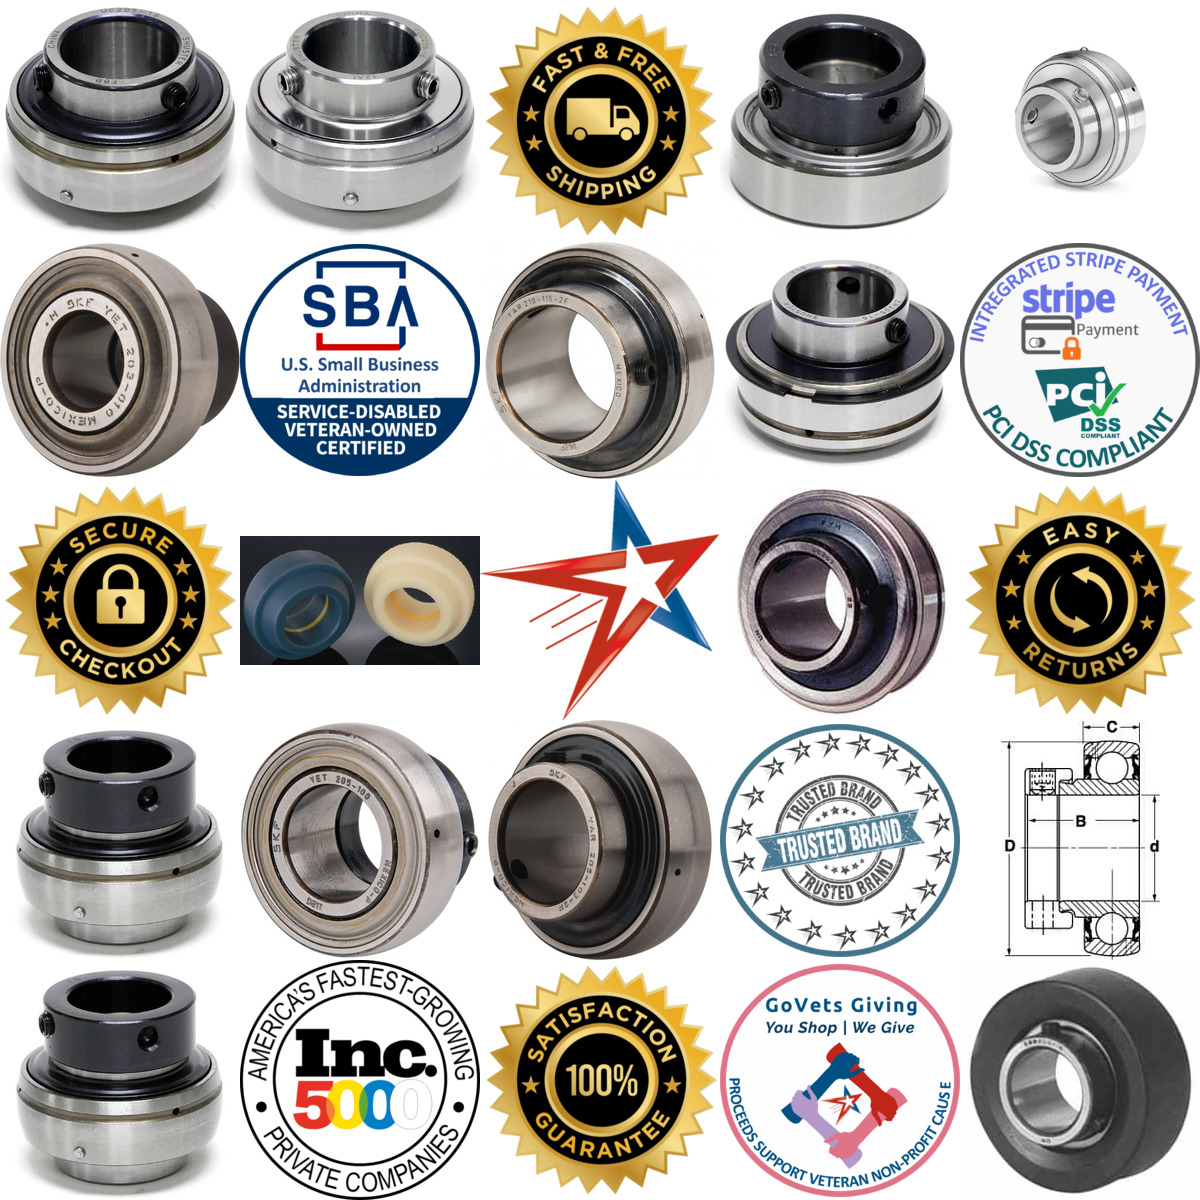 A selection of Insert Bearings products on GoVets